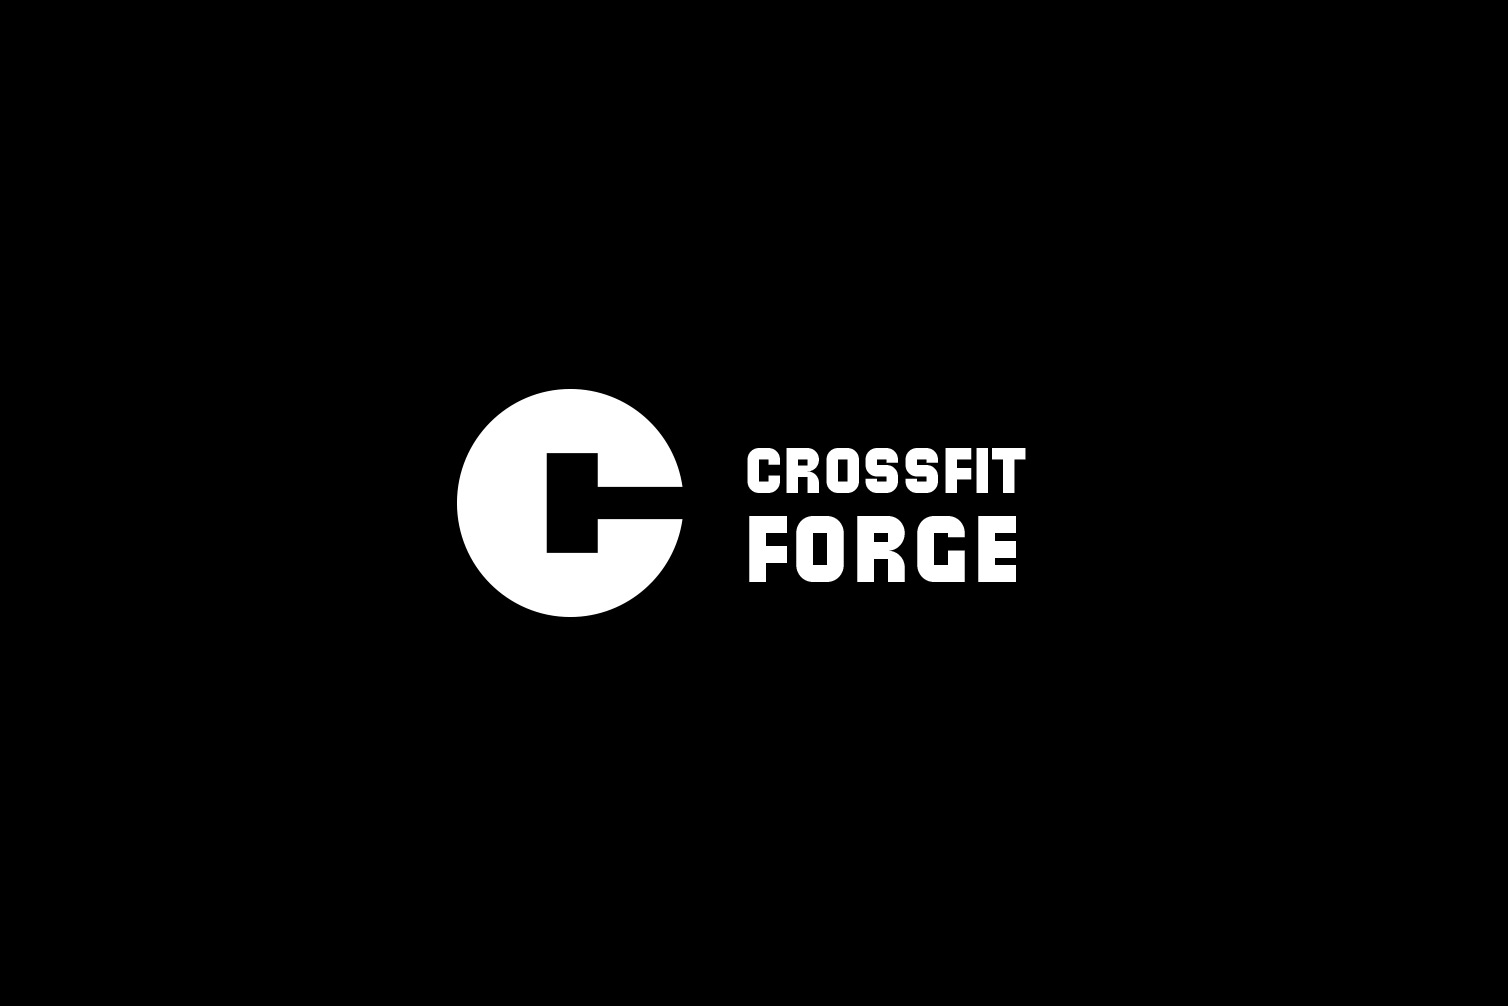 Crossfit Forge